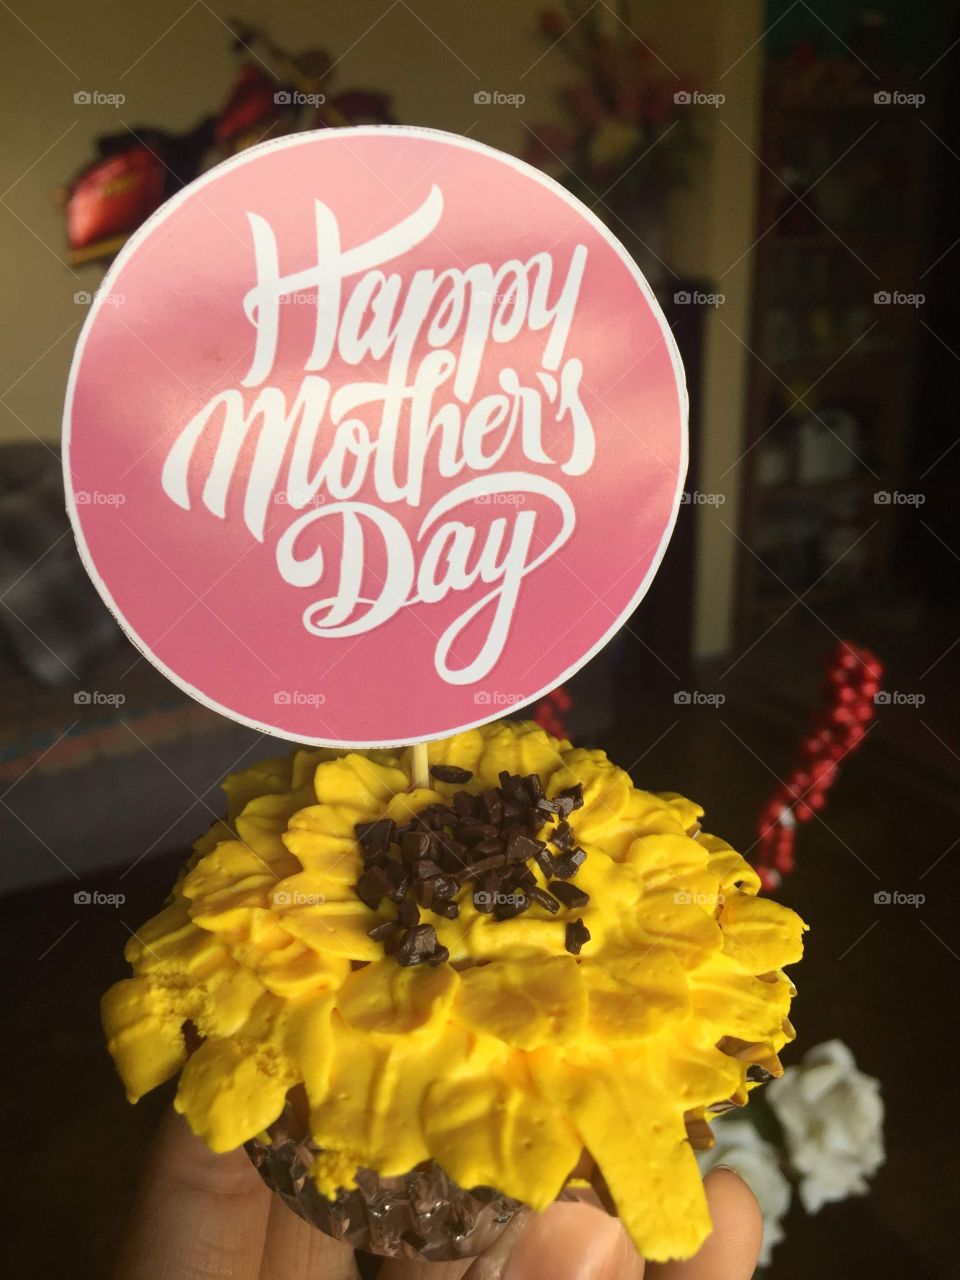 Appetizing, dainty, flavorful, lush, tasteful, yummy, delicious sun flower cupcake for my mama